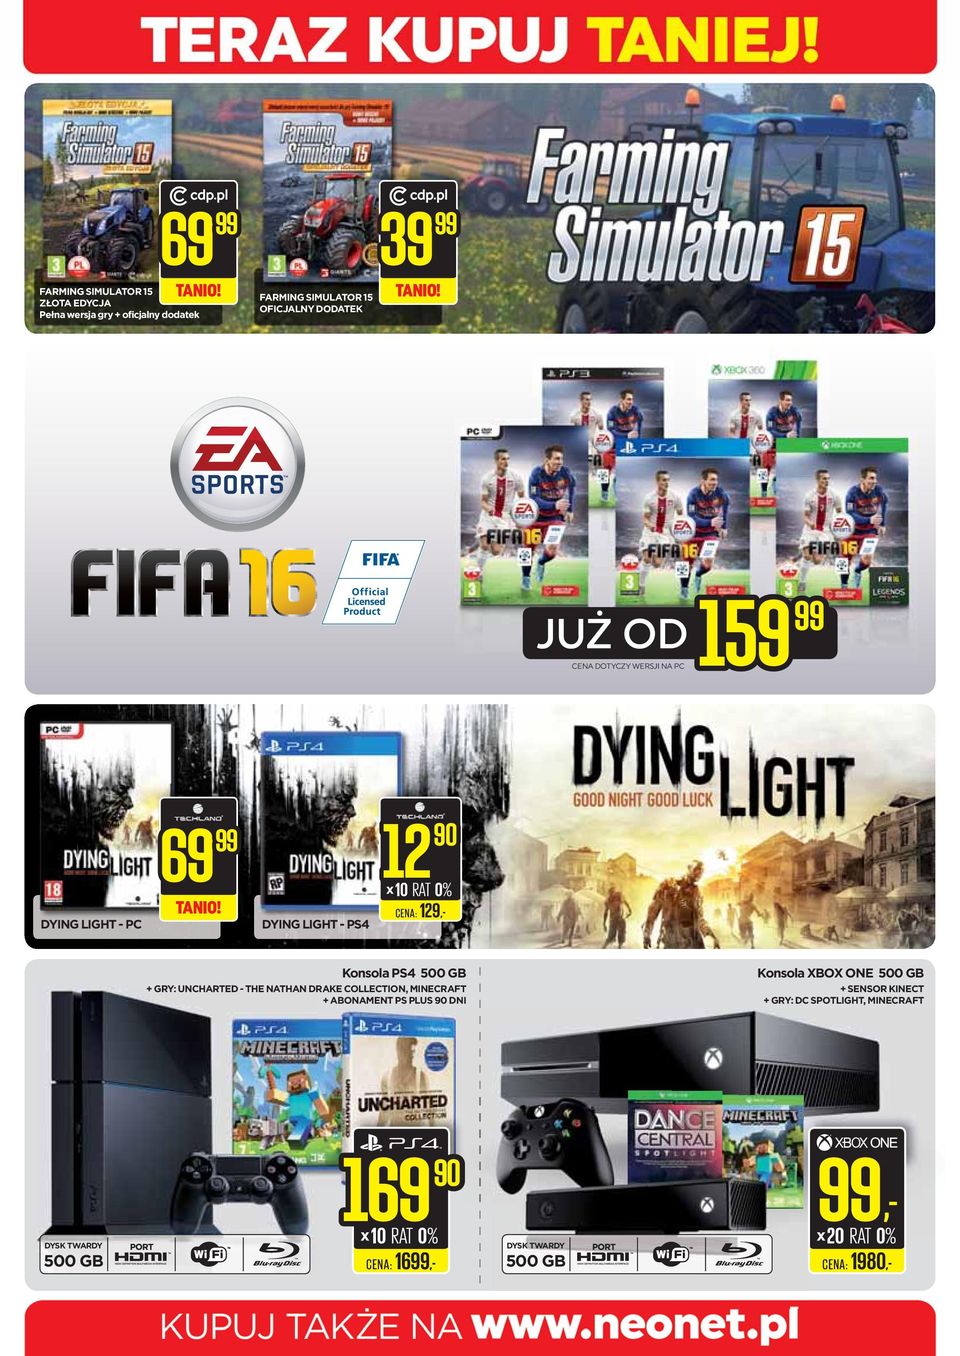 PS4 500 GB + GRY: UNCHRTED - THE NTHN DRKE COLLECTION, MINECRFT + BONMENT PS PLUS 90 DNI Konsola XBOX ONE